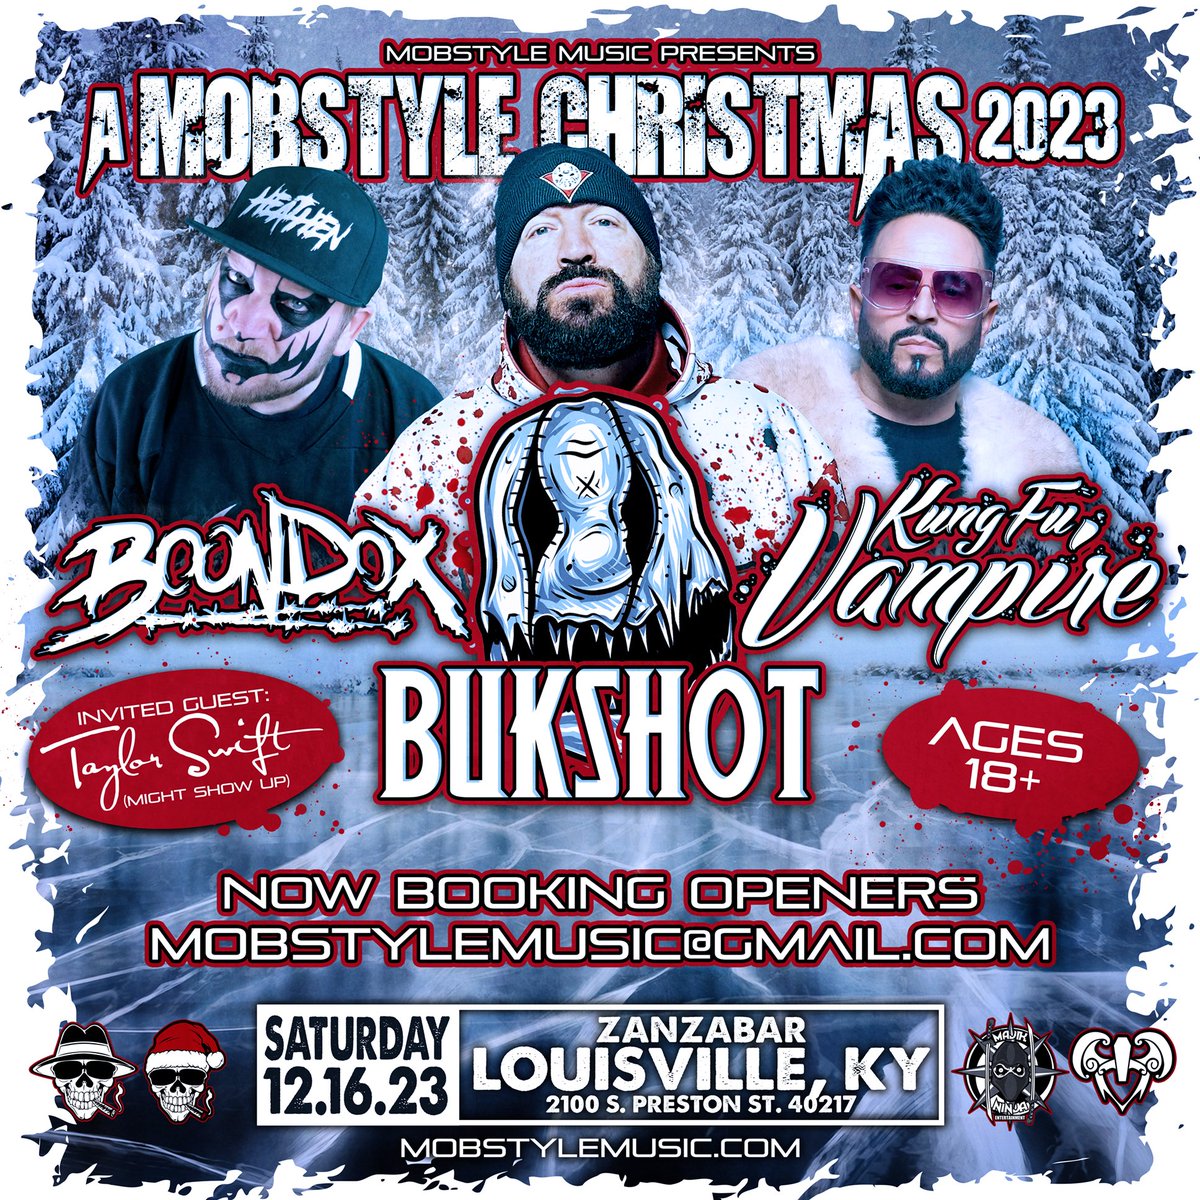 Deck the halls of Zanzabar on 12.16.23 in Louisville, KY with @Bukshizzle @KungFuVampire and yours truly, at A Mobstyle Christmas!